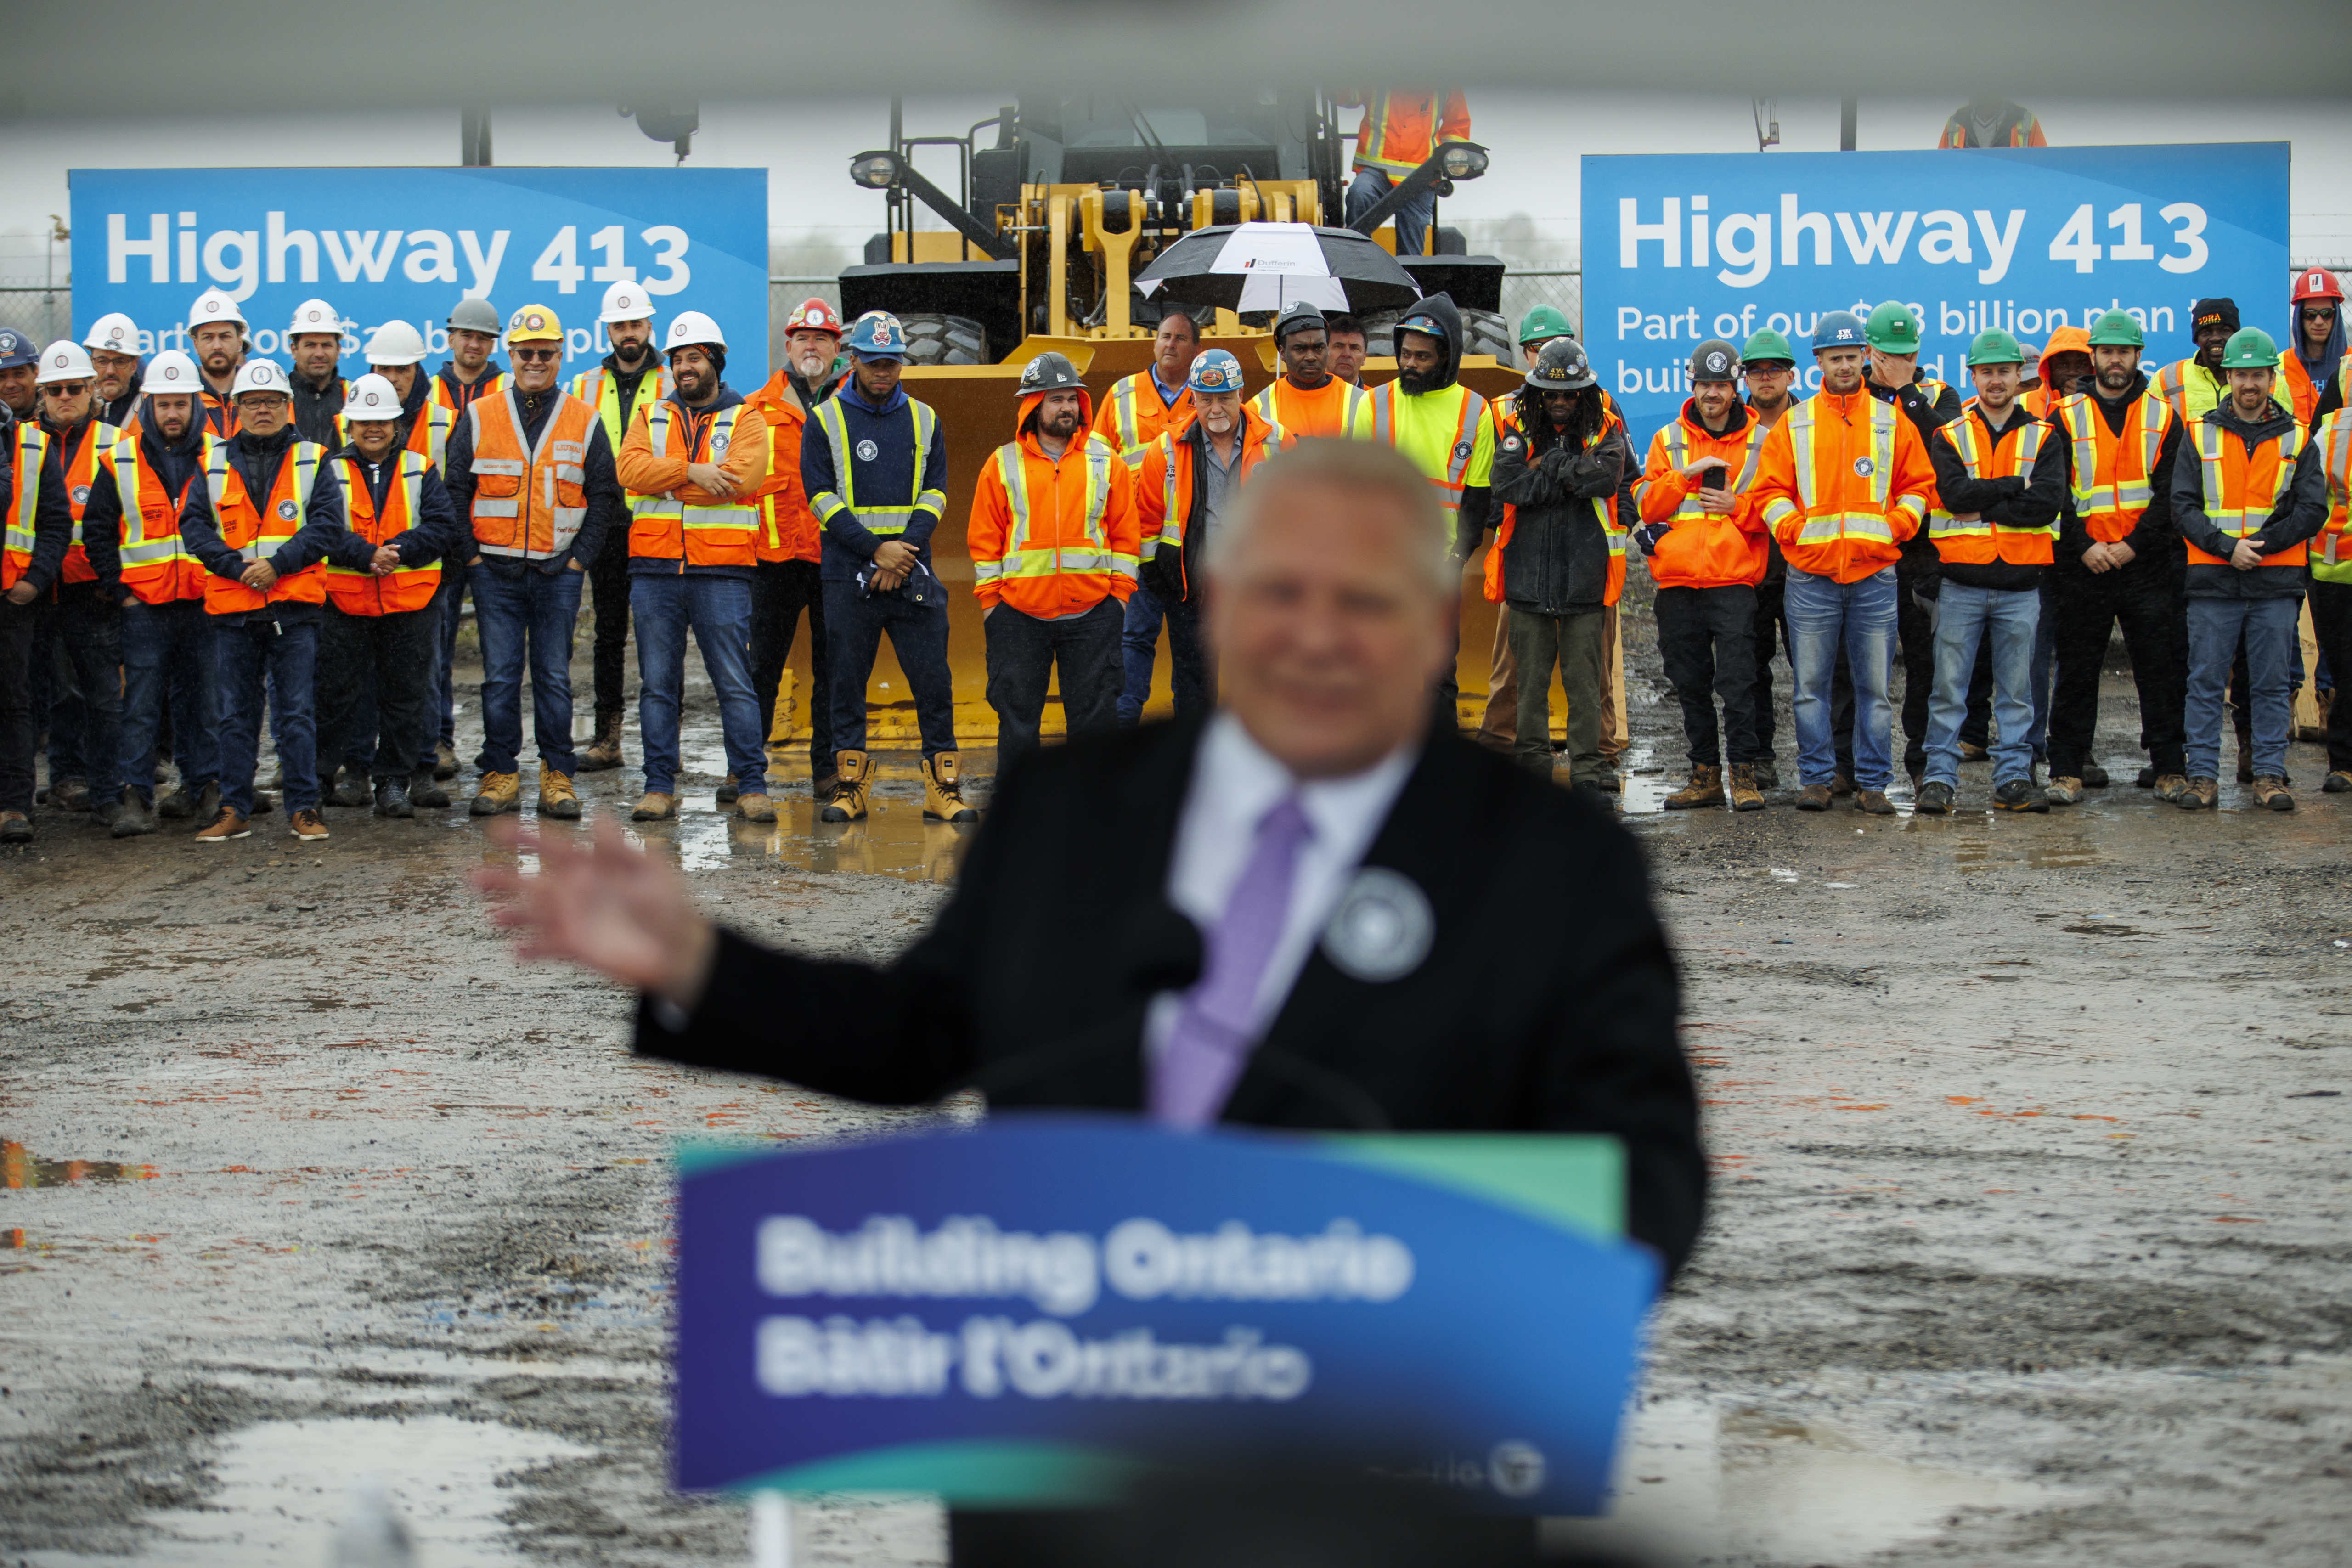 Ontario sets sights on Highway 413 construction, promises more roads